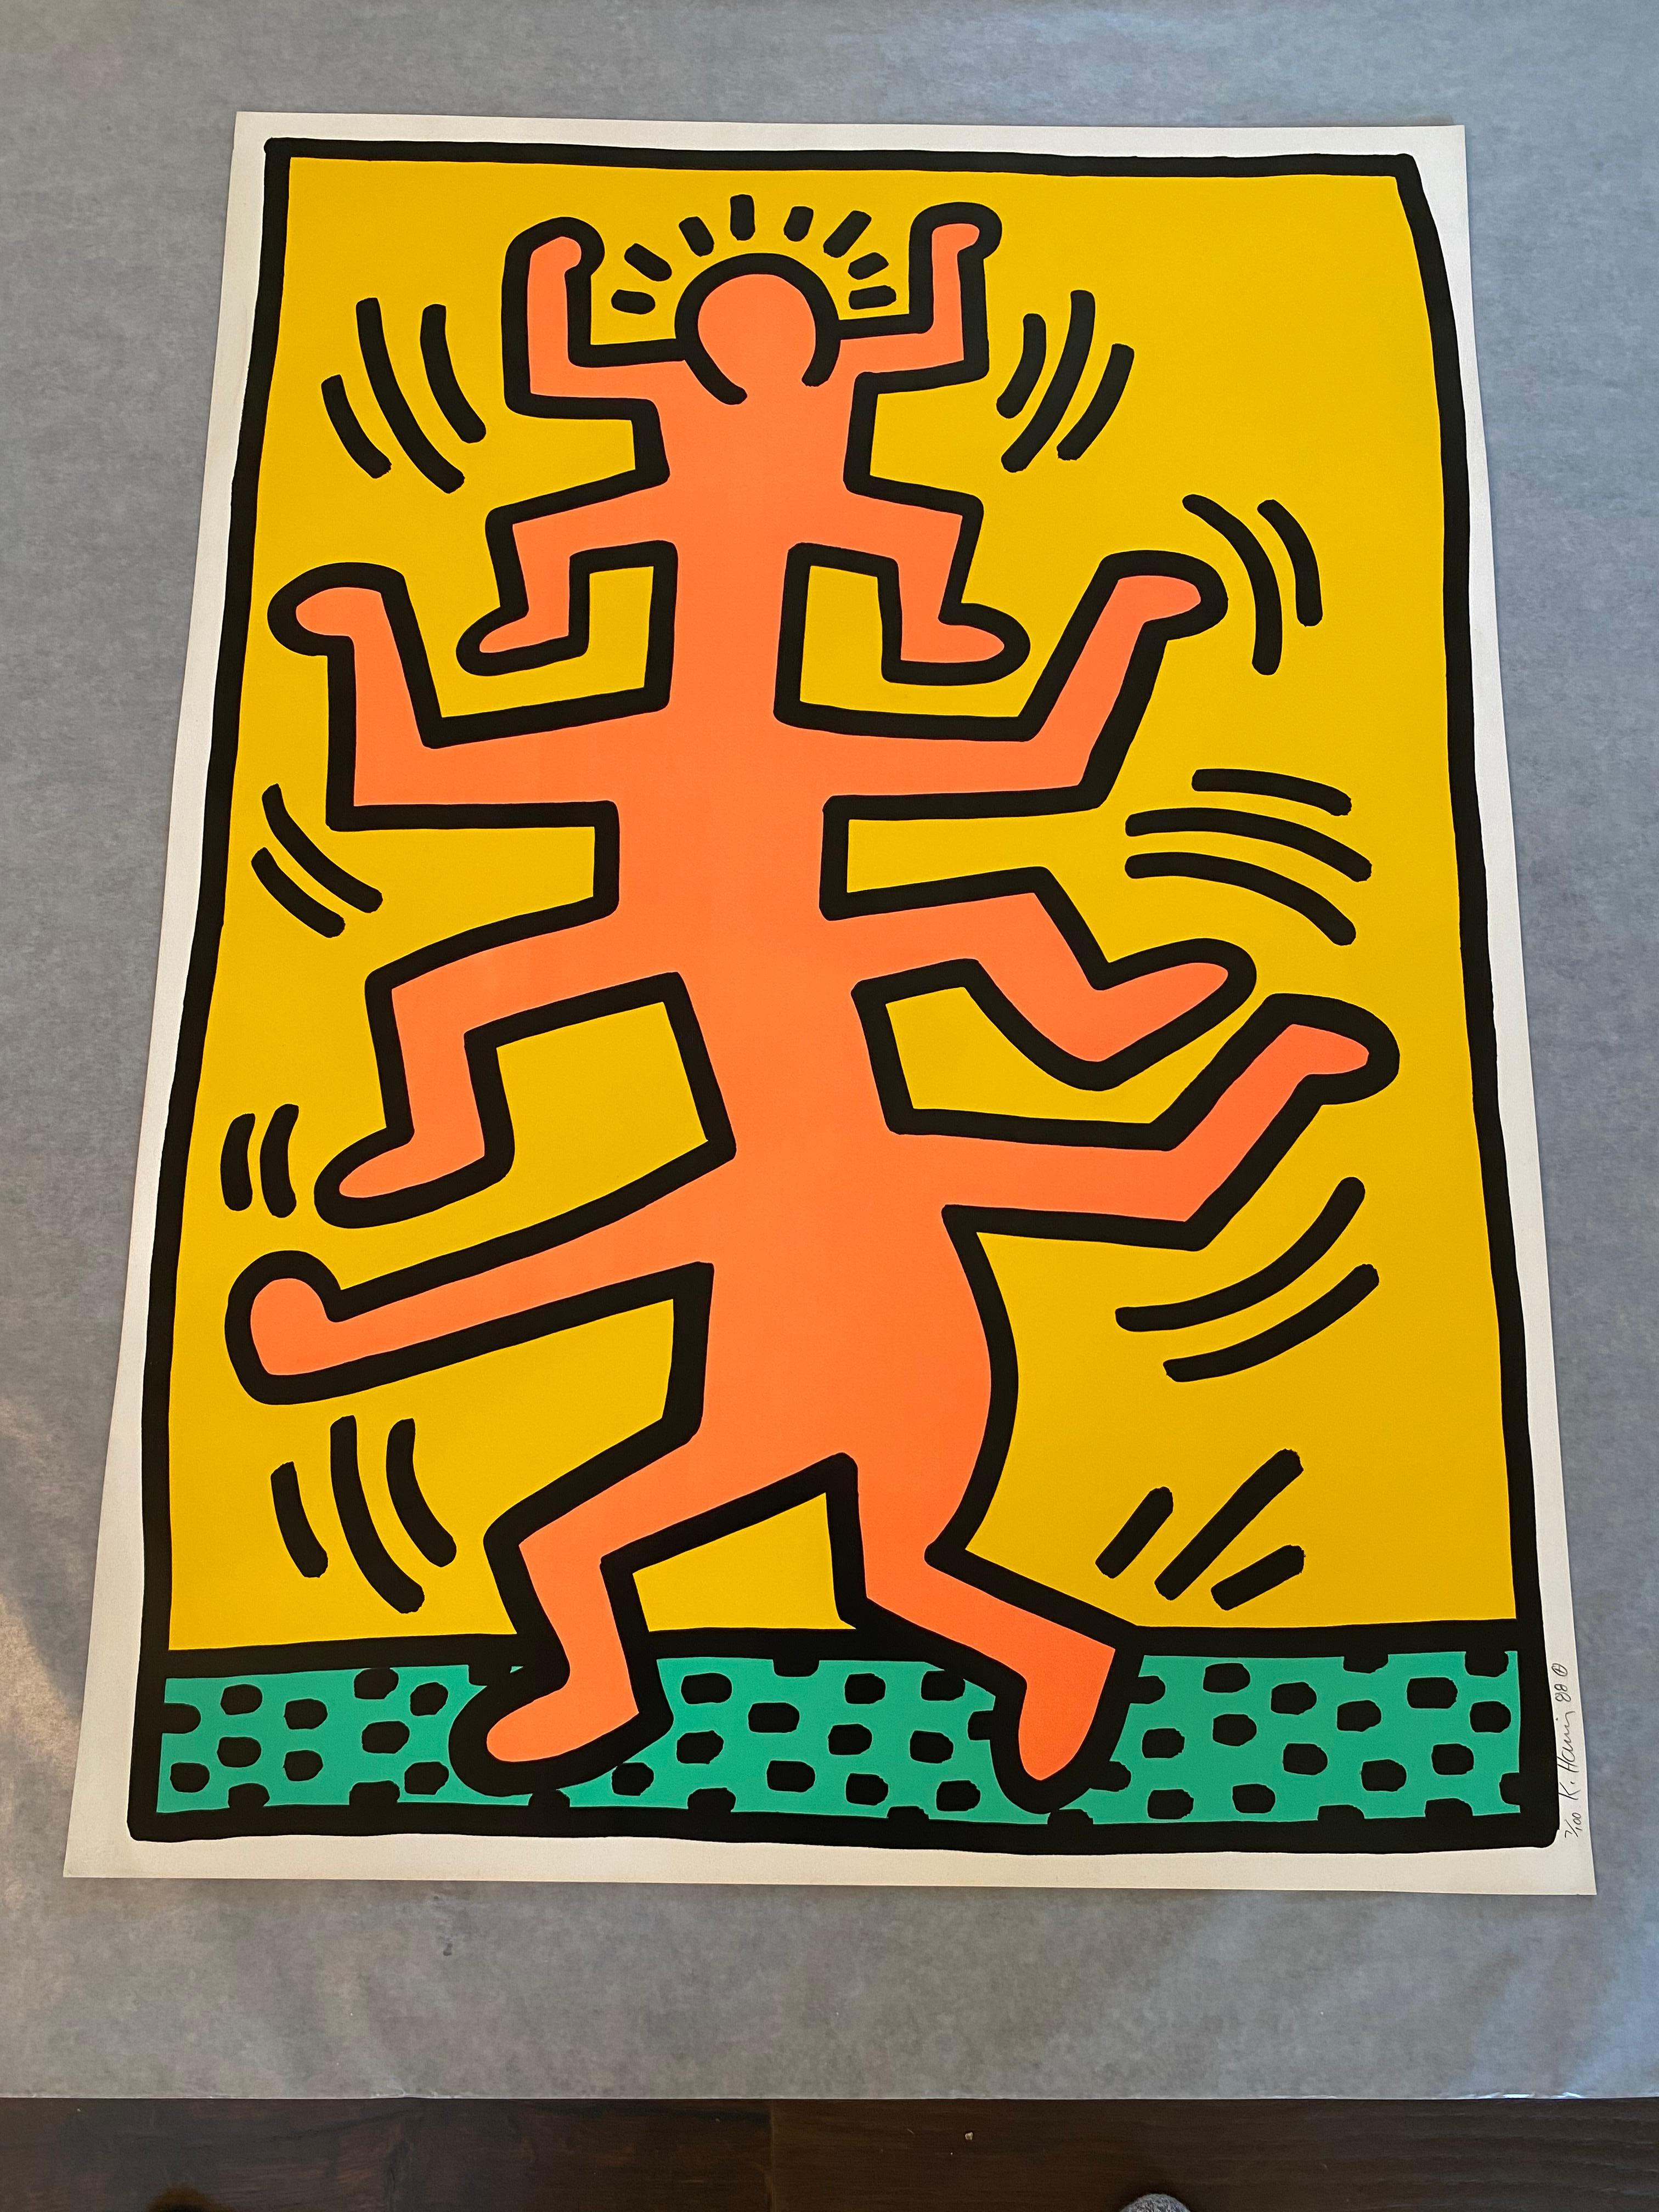 Plate I, from Growing Suite - Print by Keith Haring